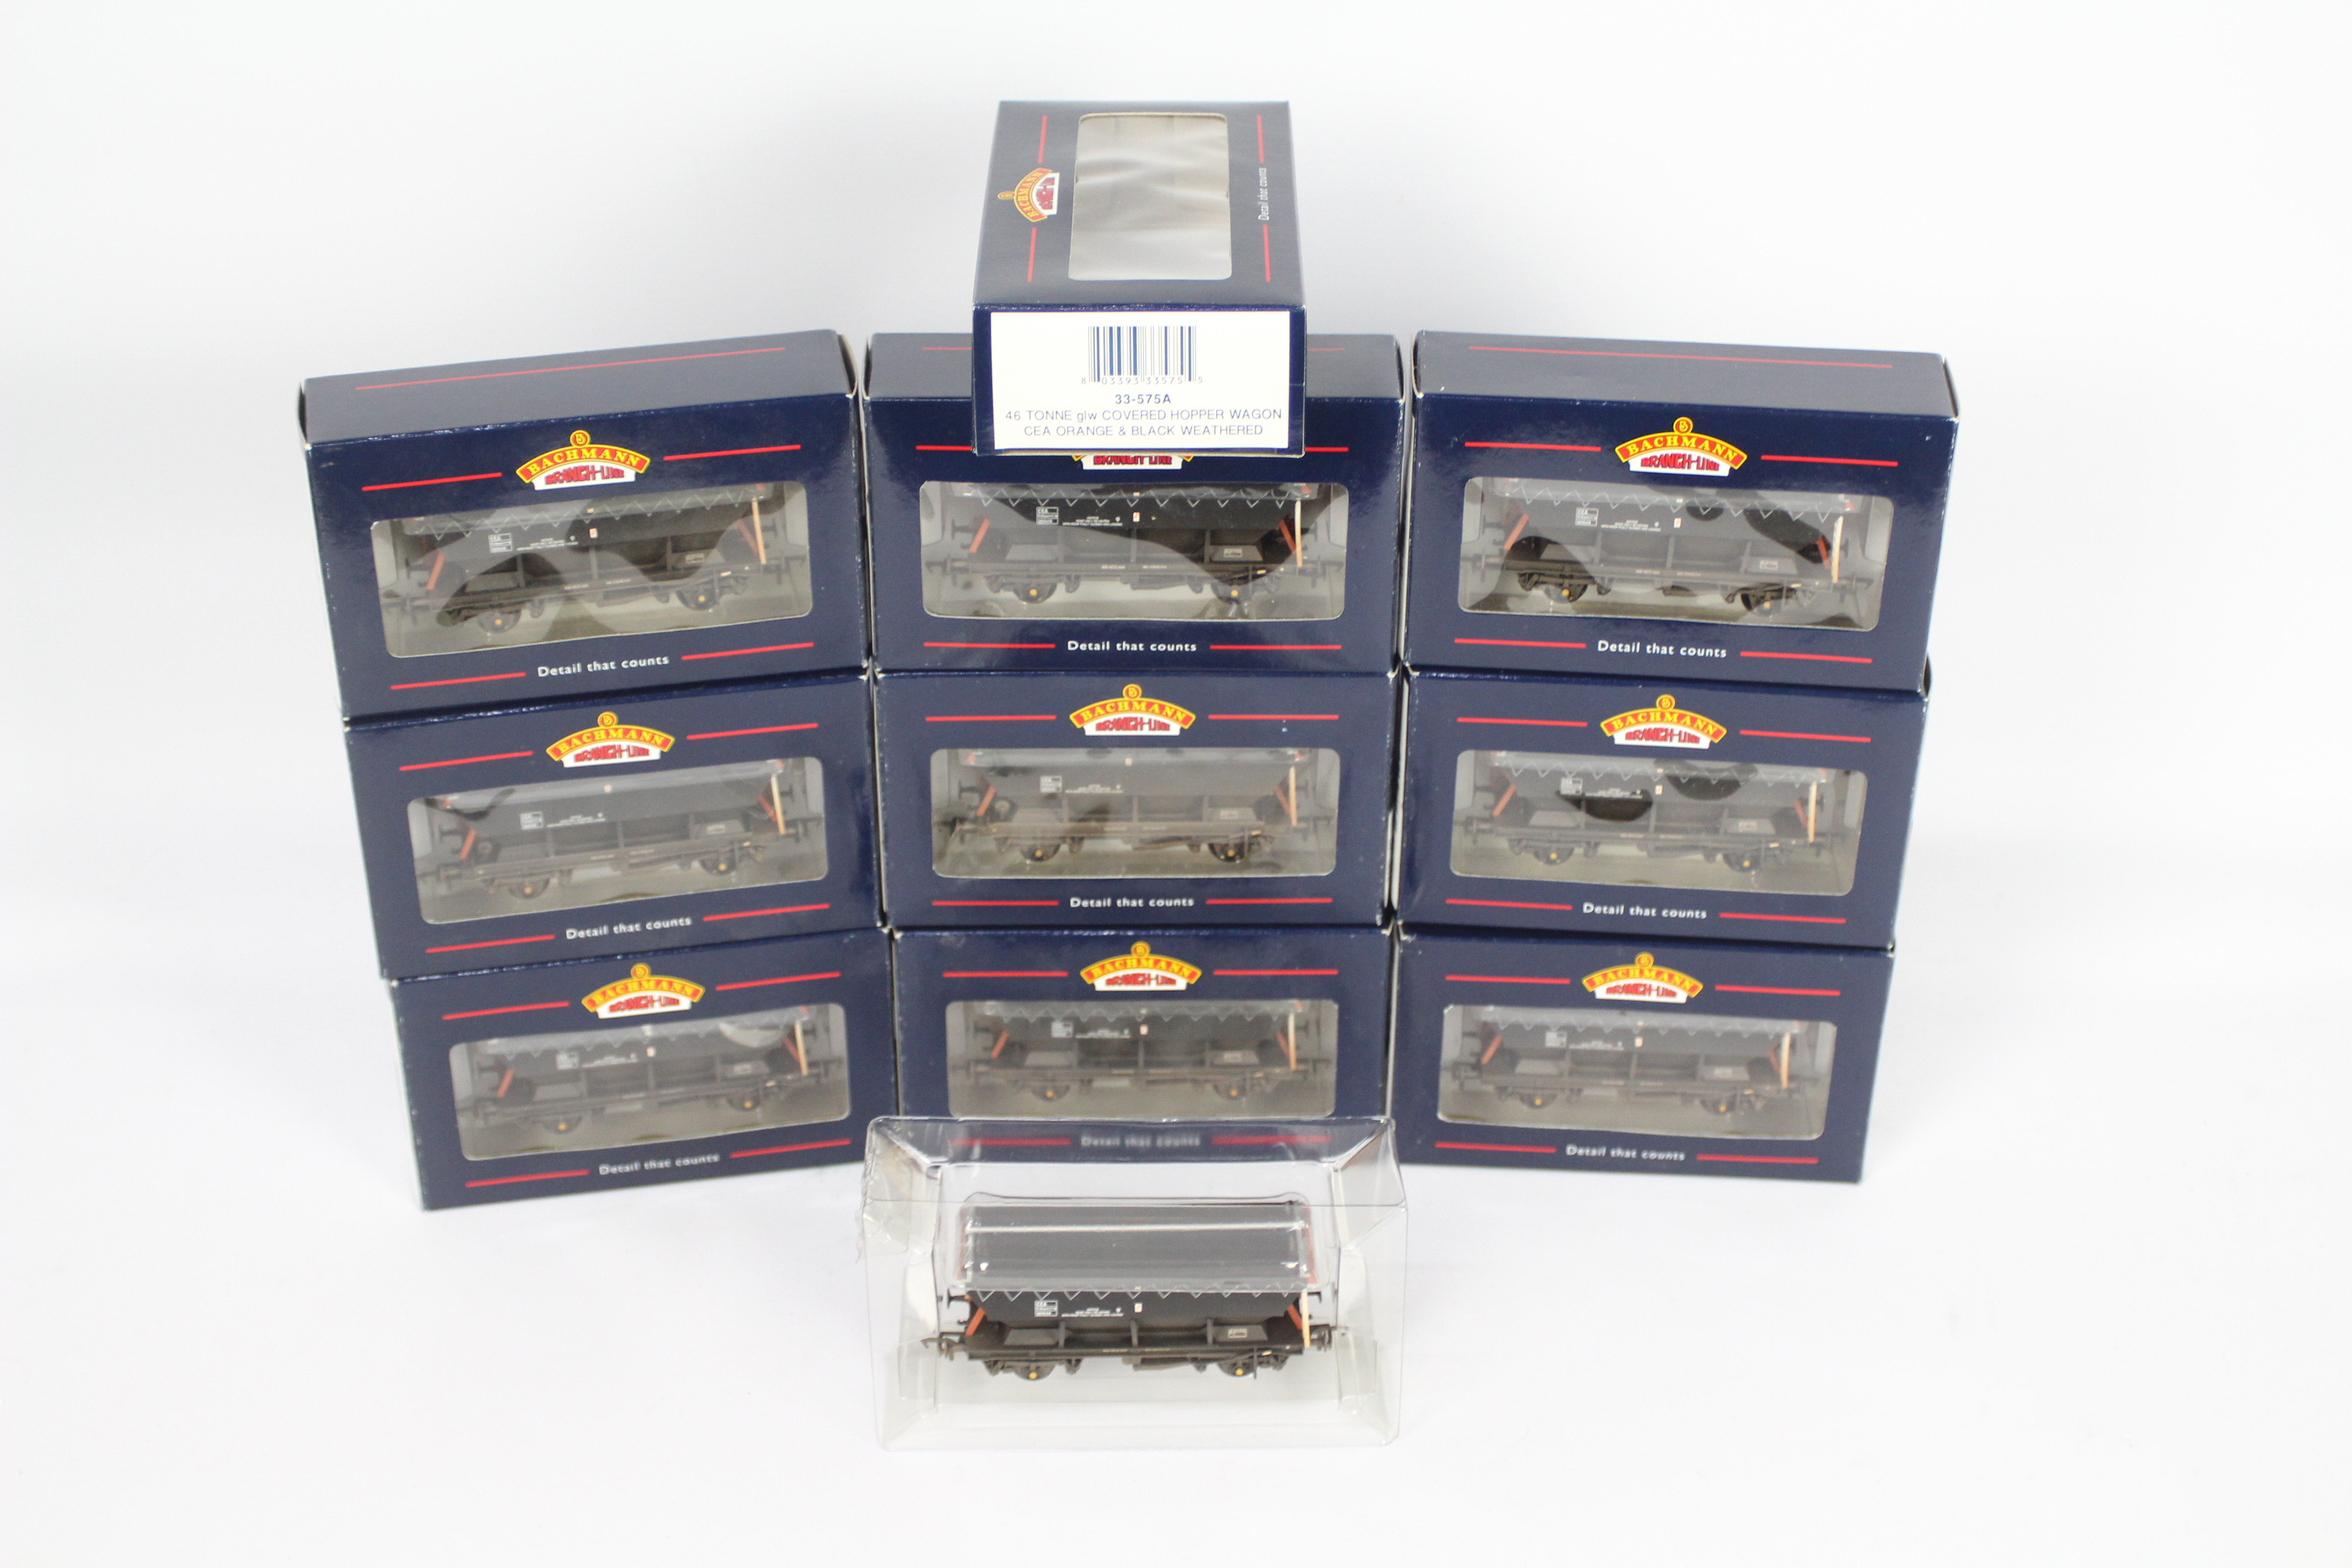 Bachmann - A fleet of 10 x boxed OO gauge 46 Tonne Covered Hopper wagons in CEA orange and black